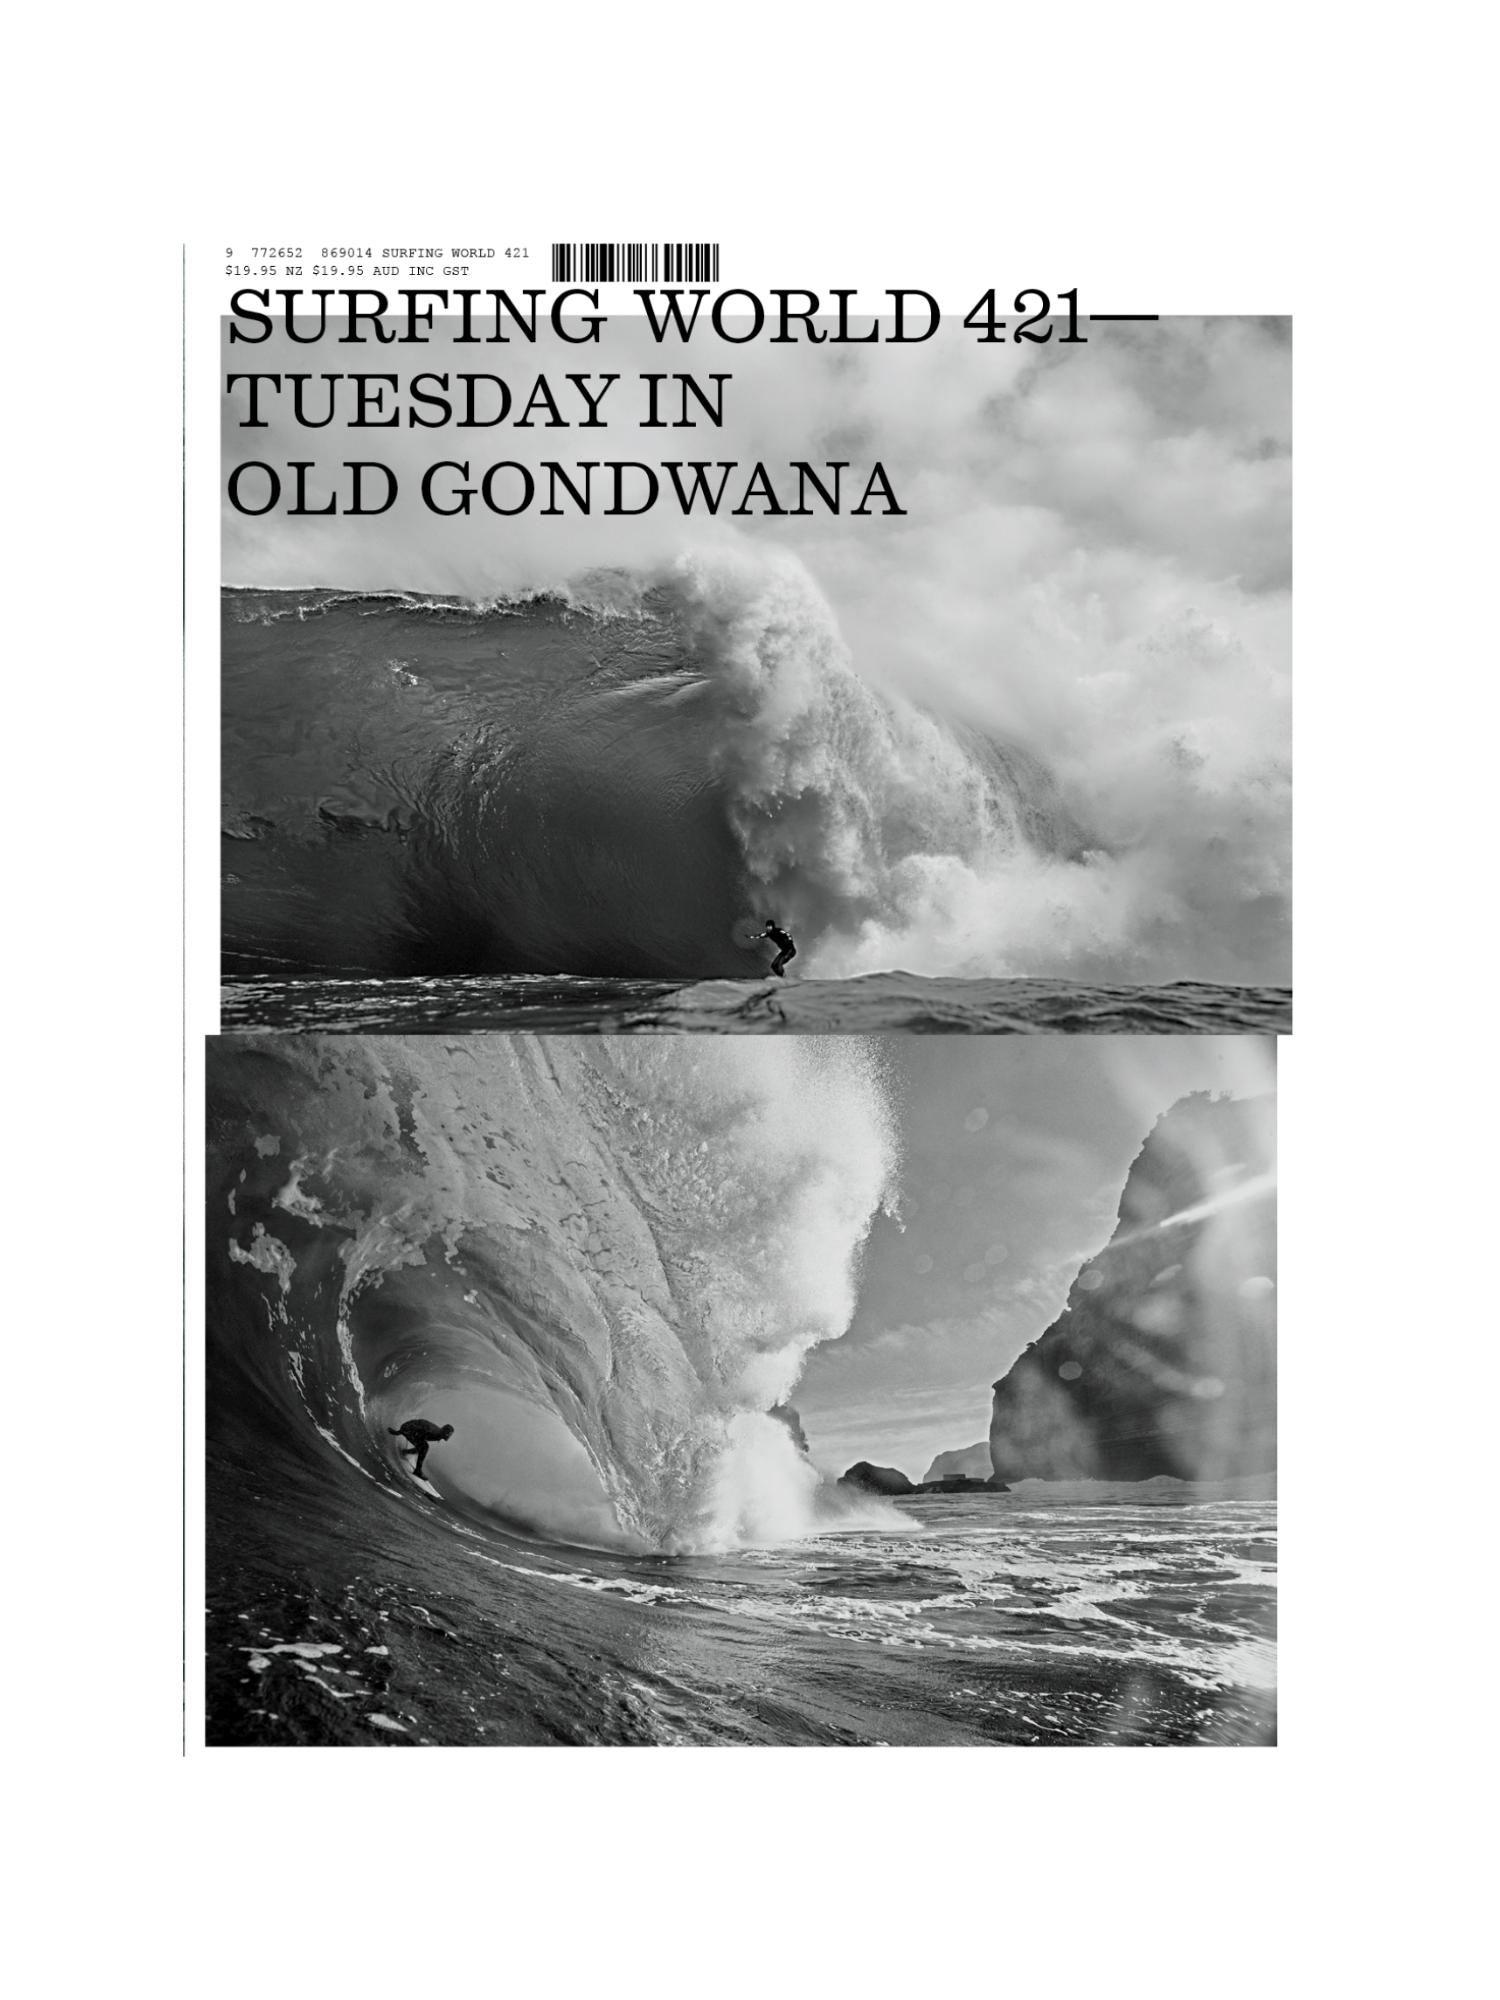 Surfing World Issue 421 Tuesday in Old Gondwana